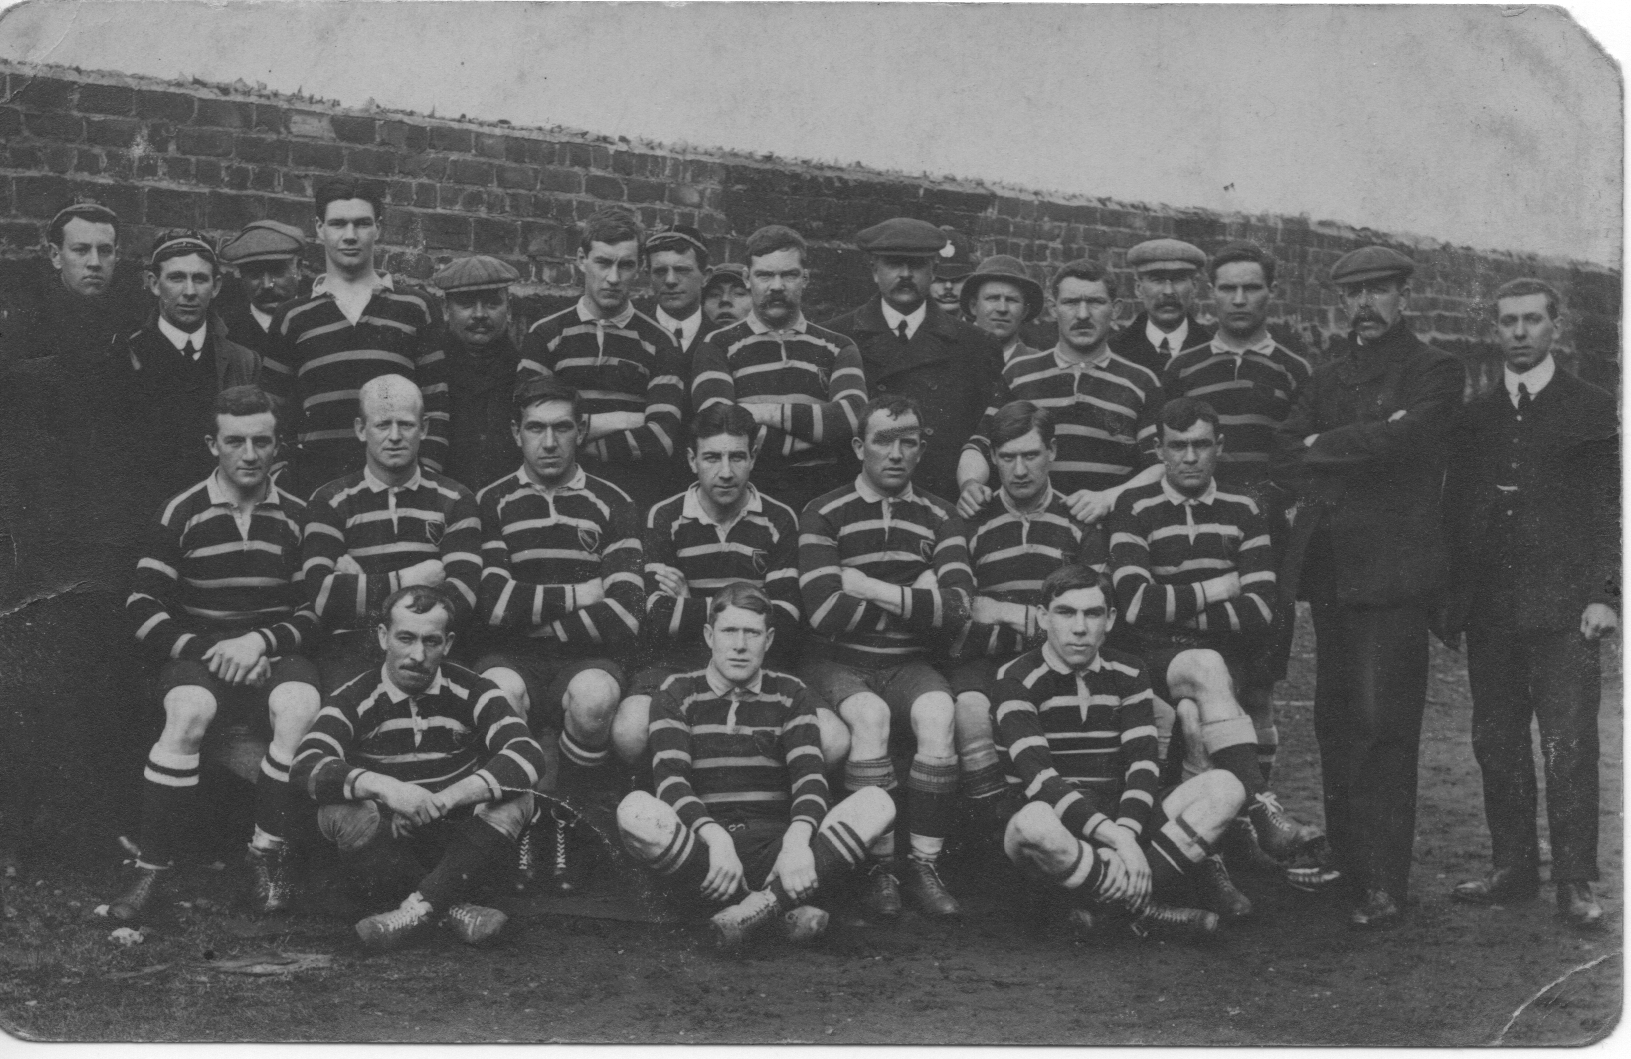 Historic picture of the Cornwall team of 1909